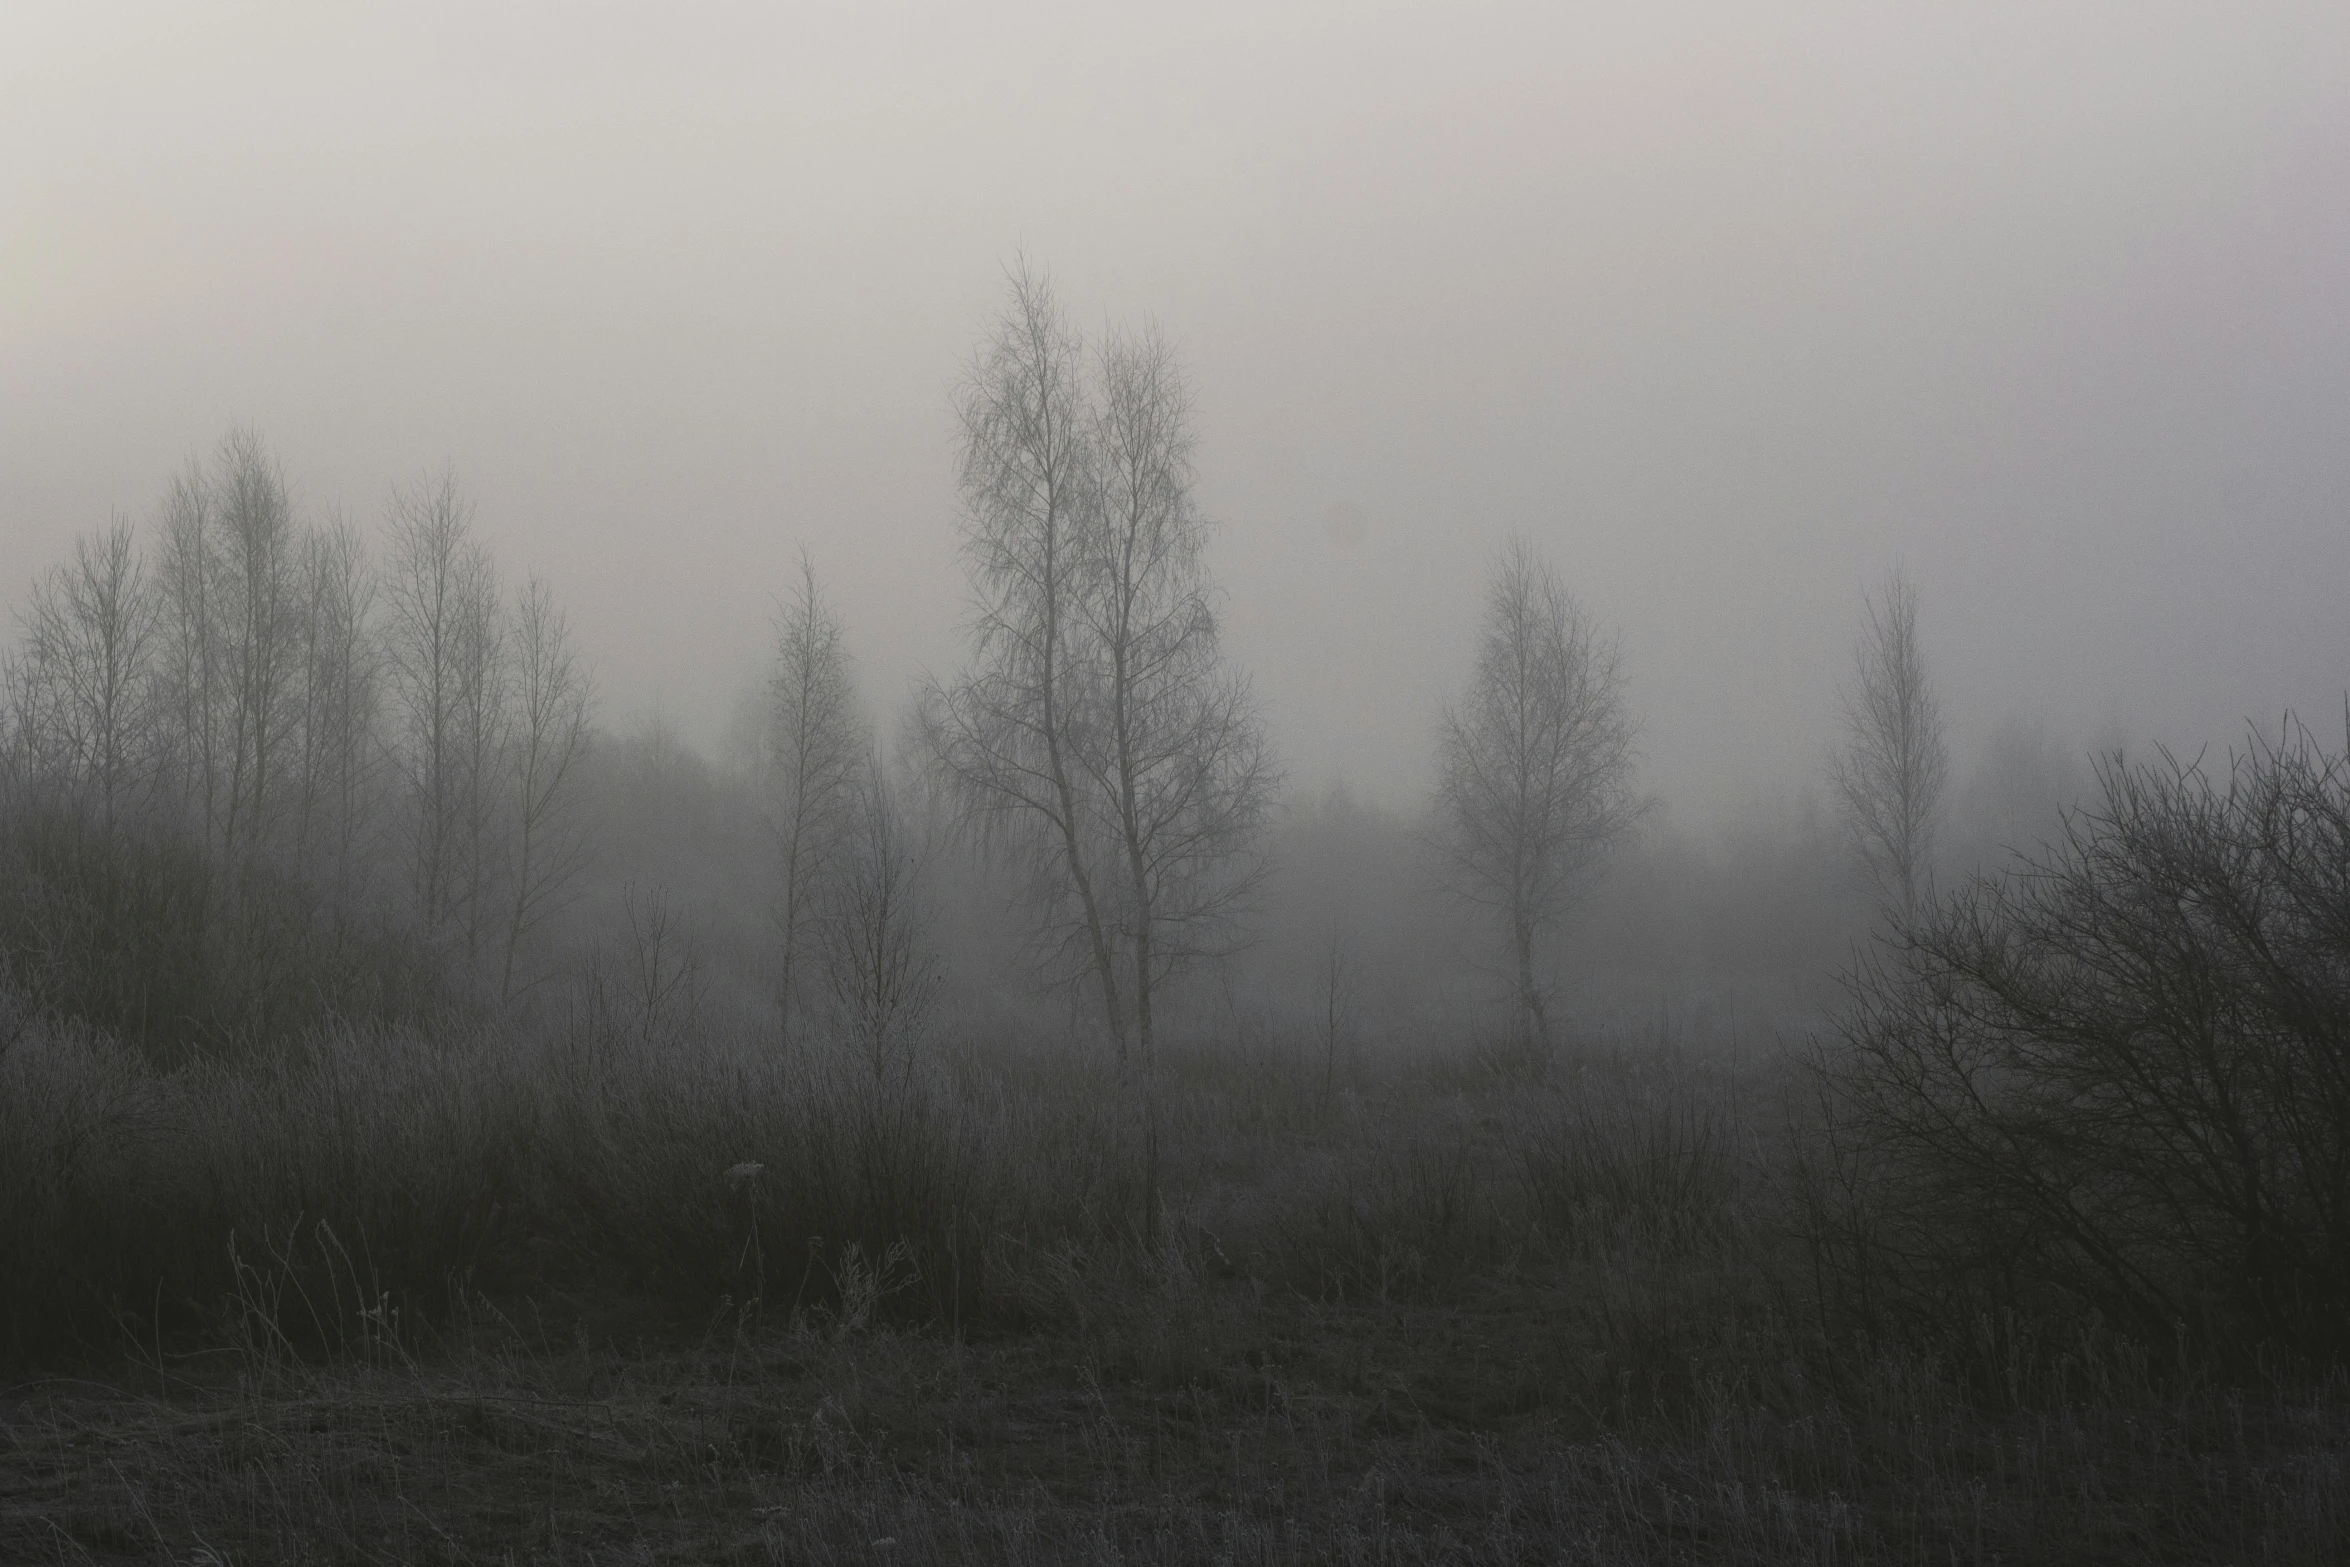 fog shrouds a heavily logged area in the woods